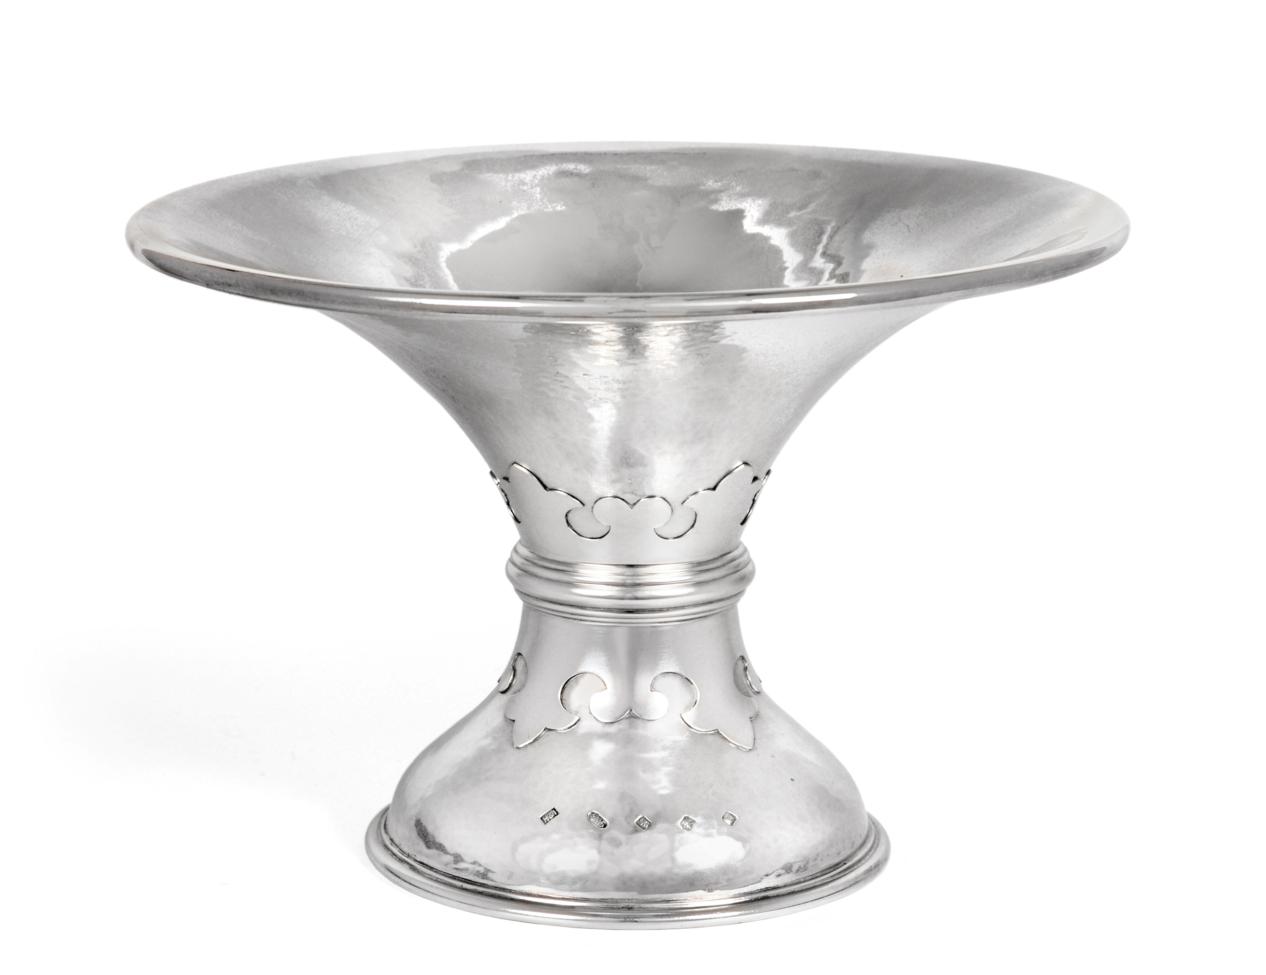 A Modern Scottish Silver Footed Bowl of Arts & Crafts Influence, Hamilton & Inches, Edinburgh